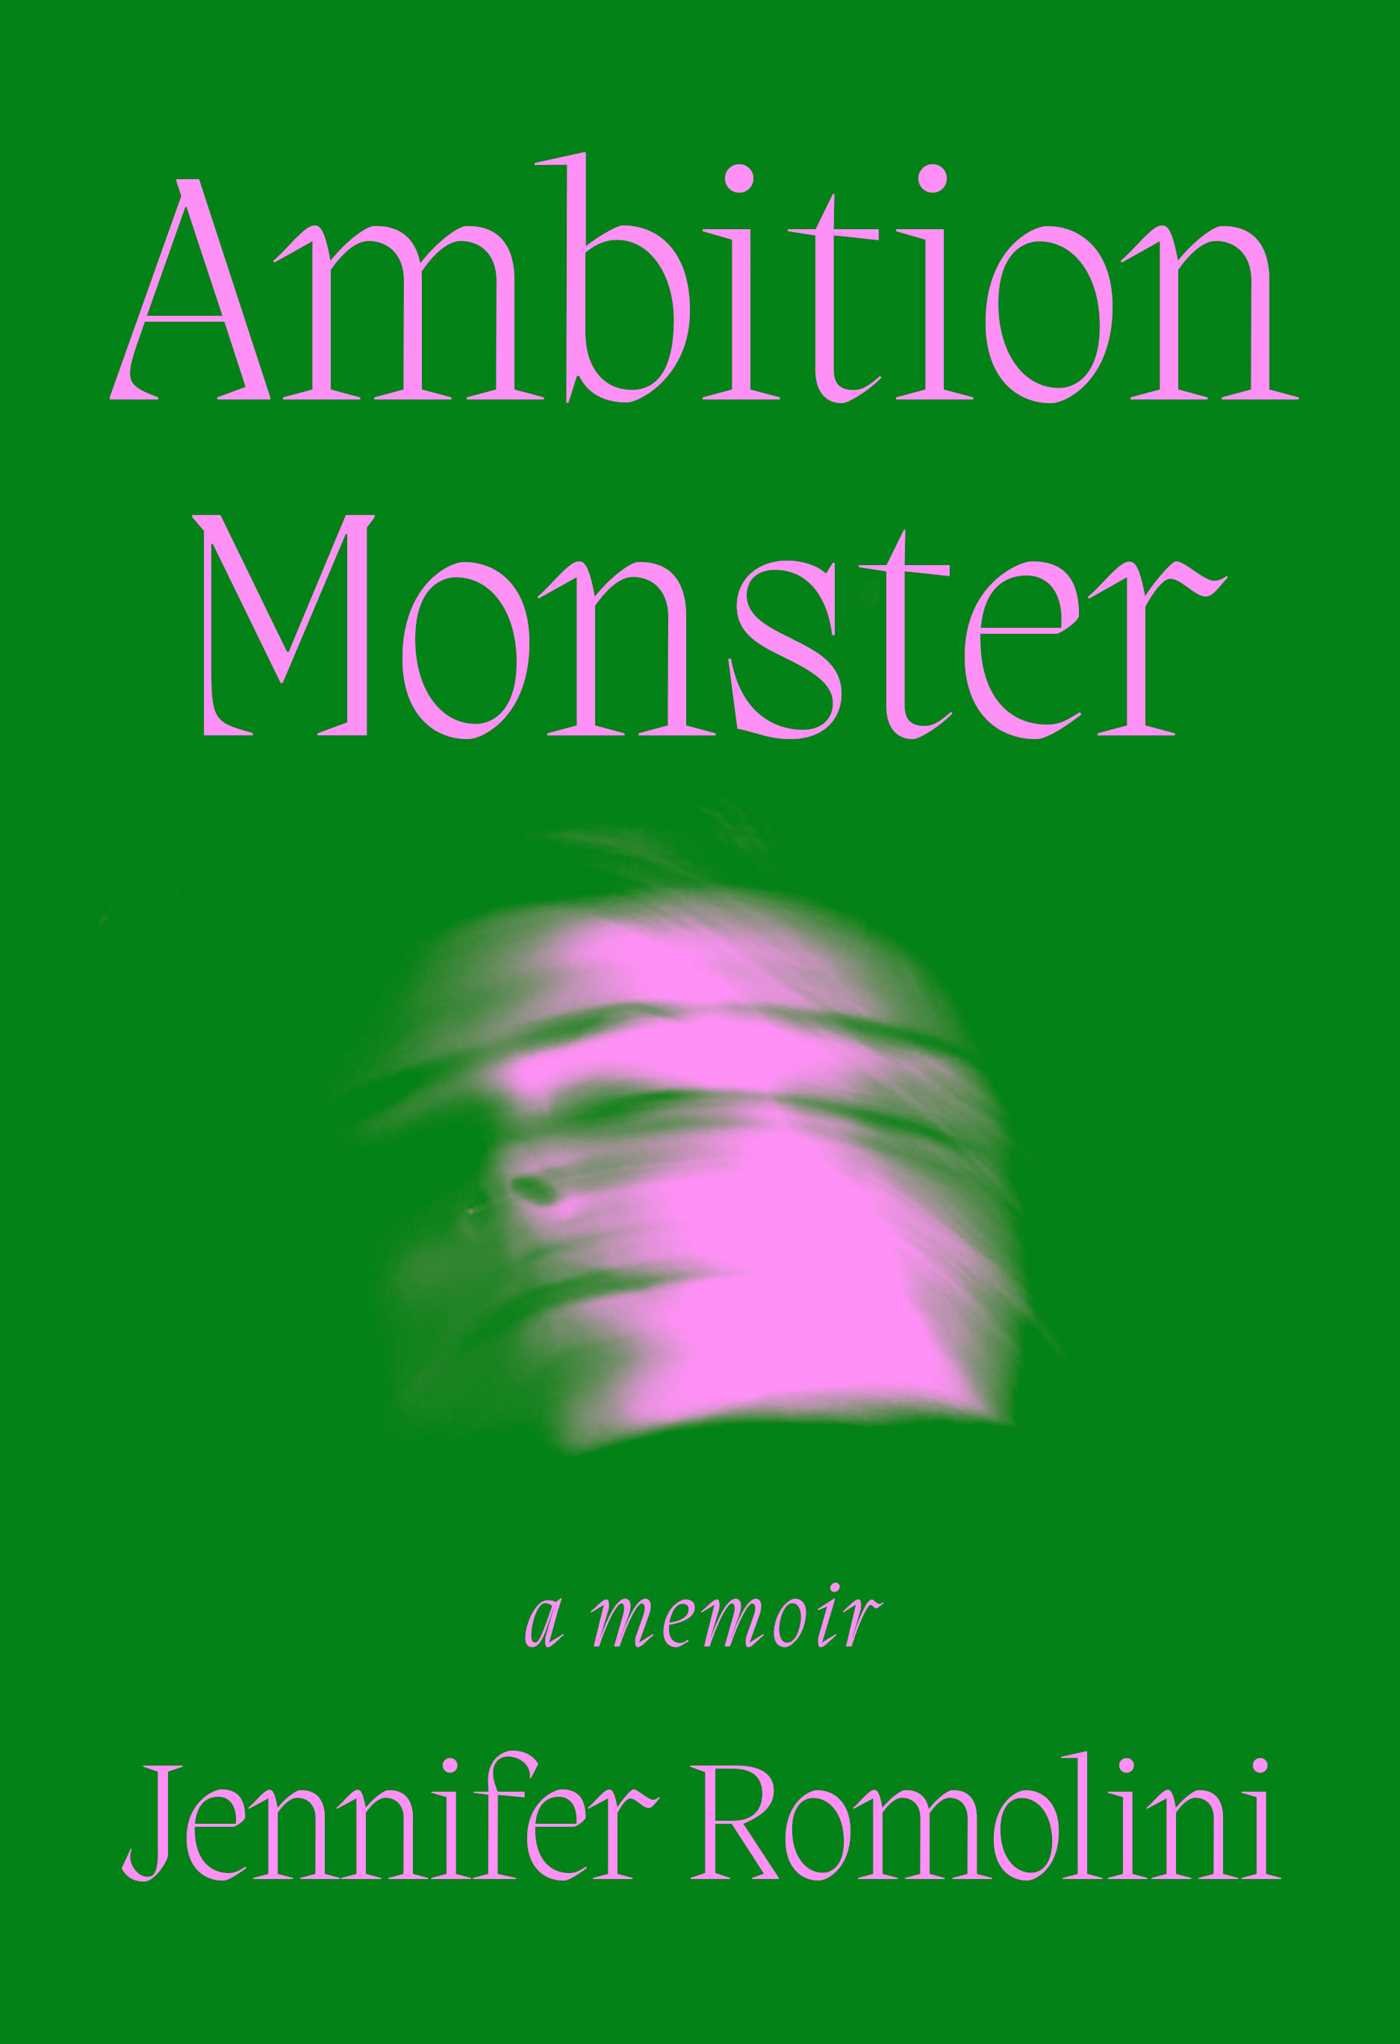 AMBITION MONSTER